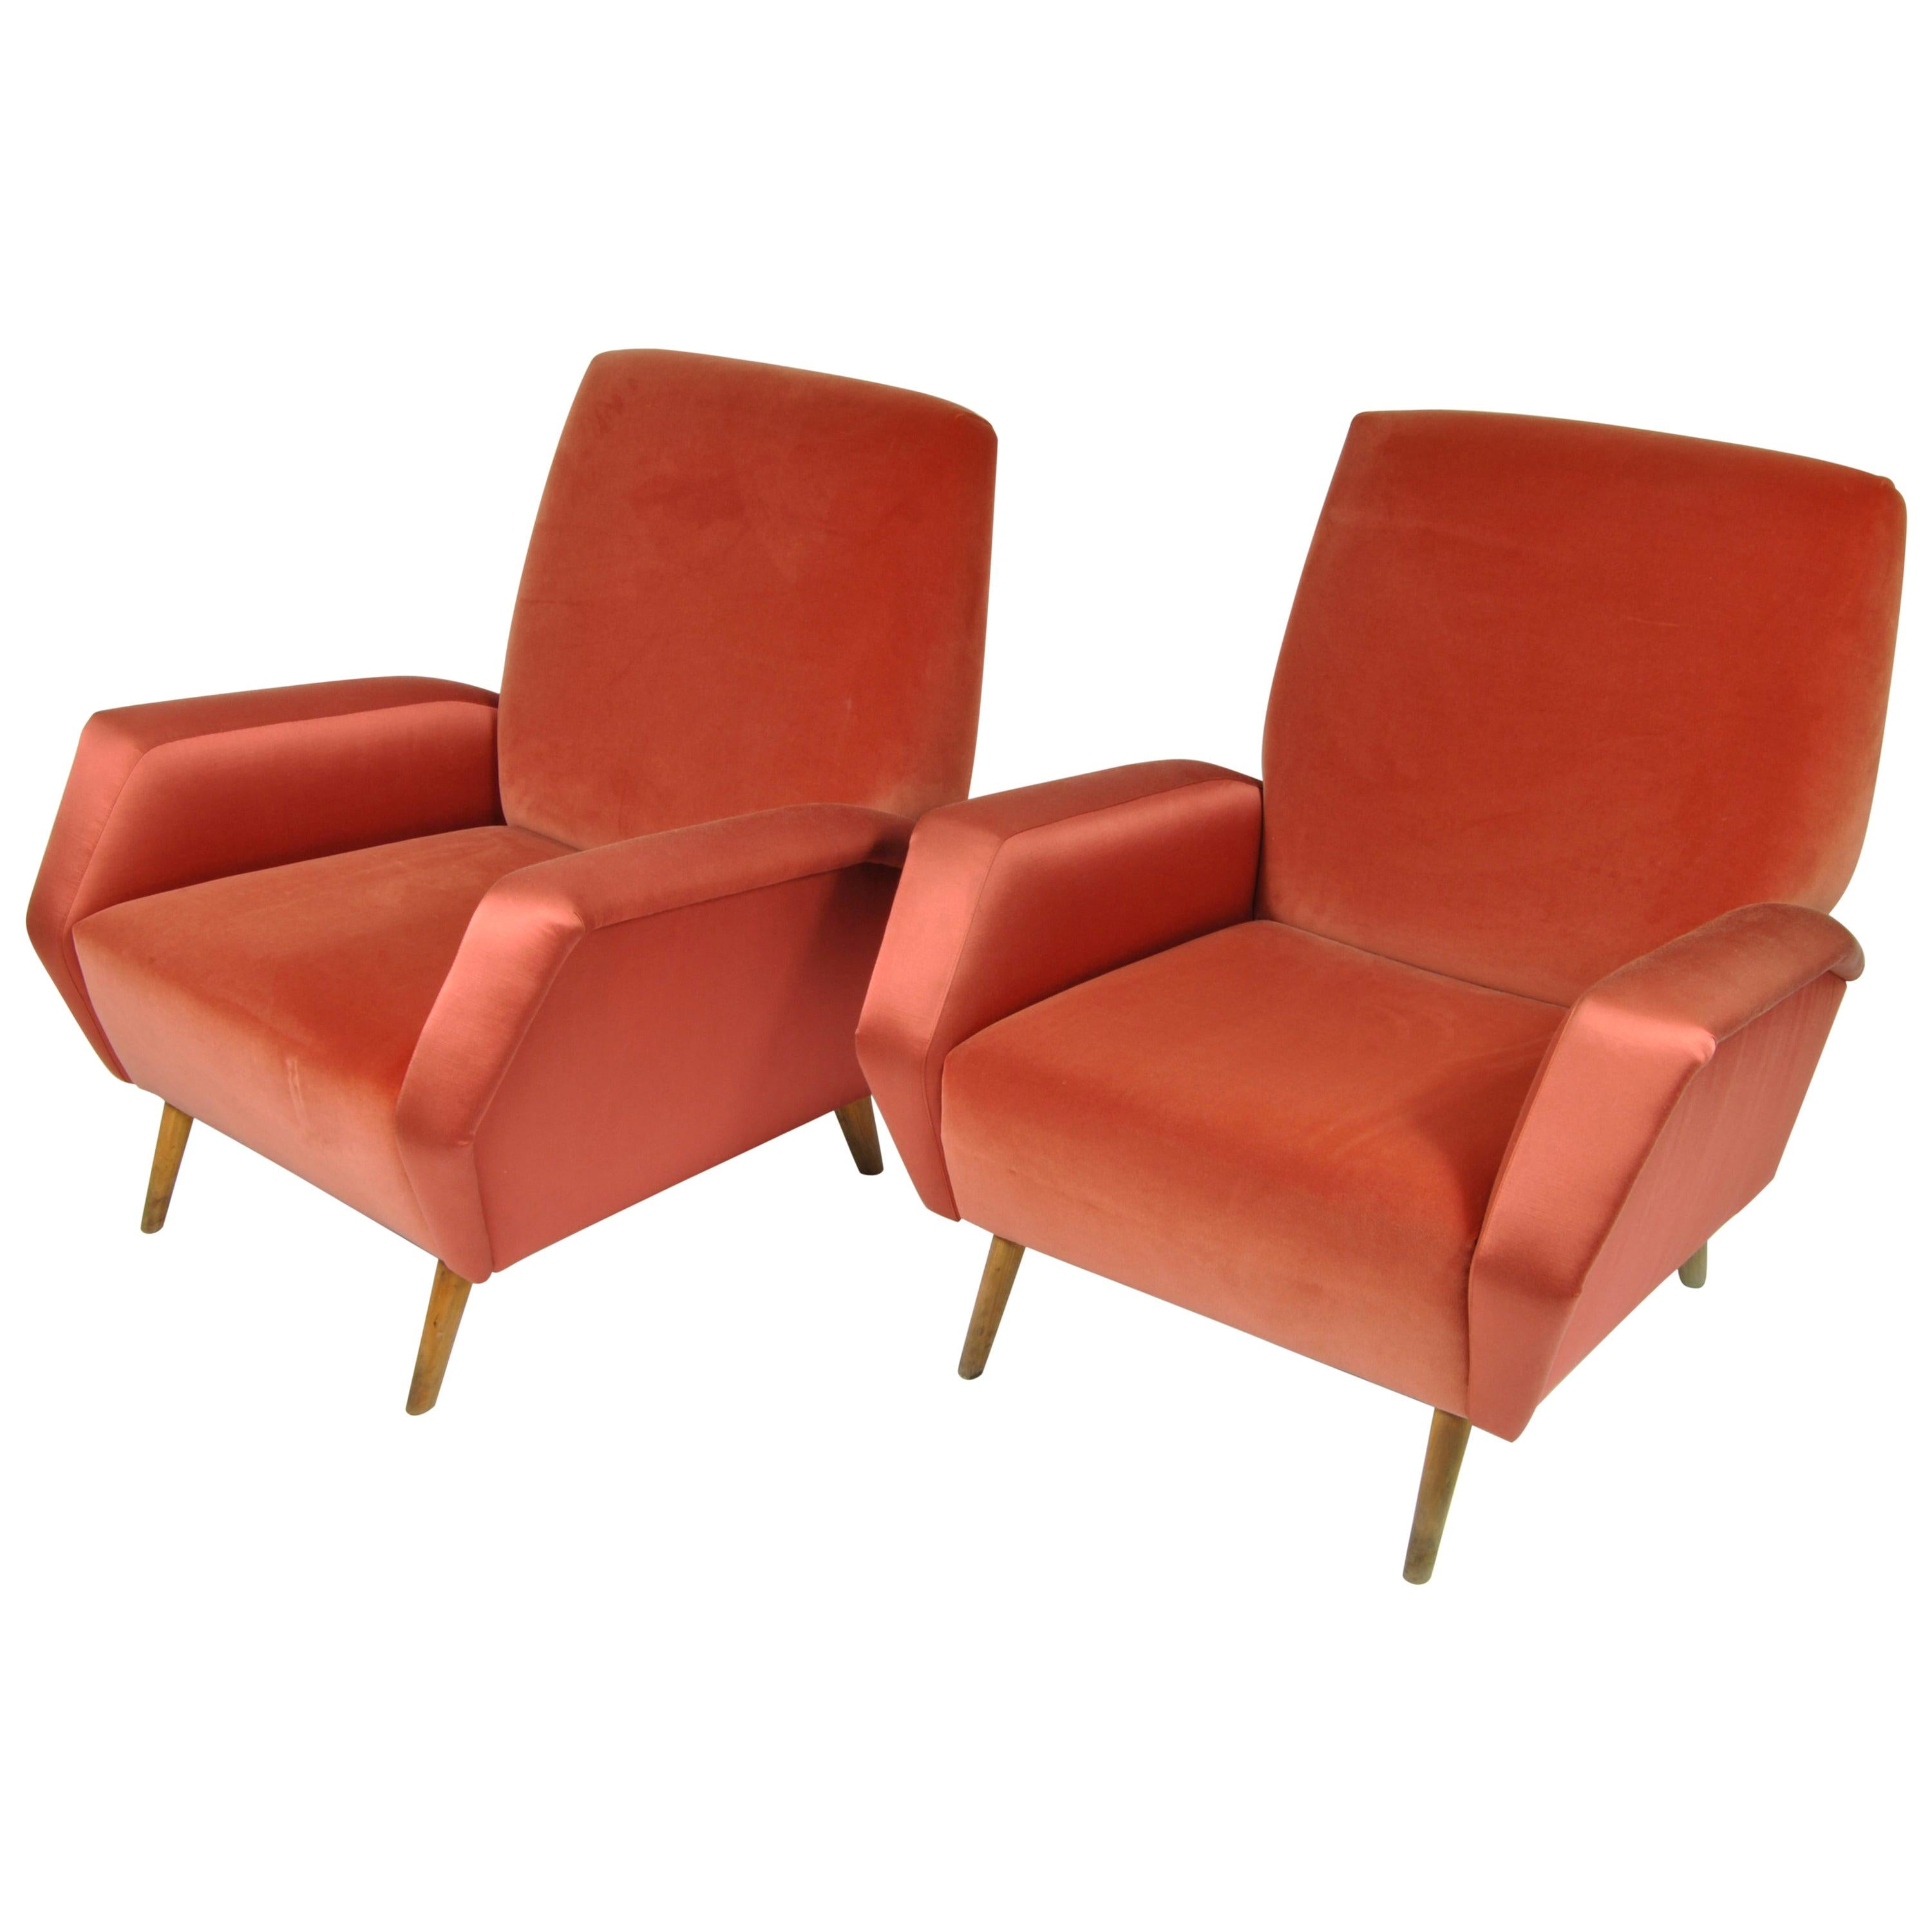 Pair of Armchairs, Mod. 803, Design by Gio Ponti, Cassina Production Italy, 1954